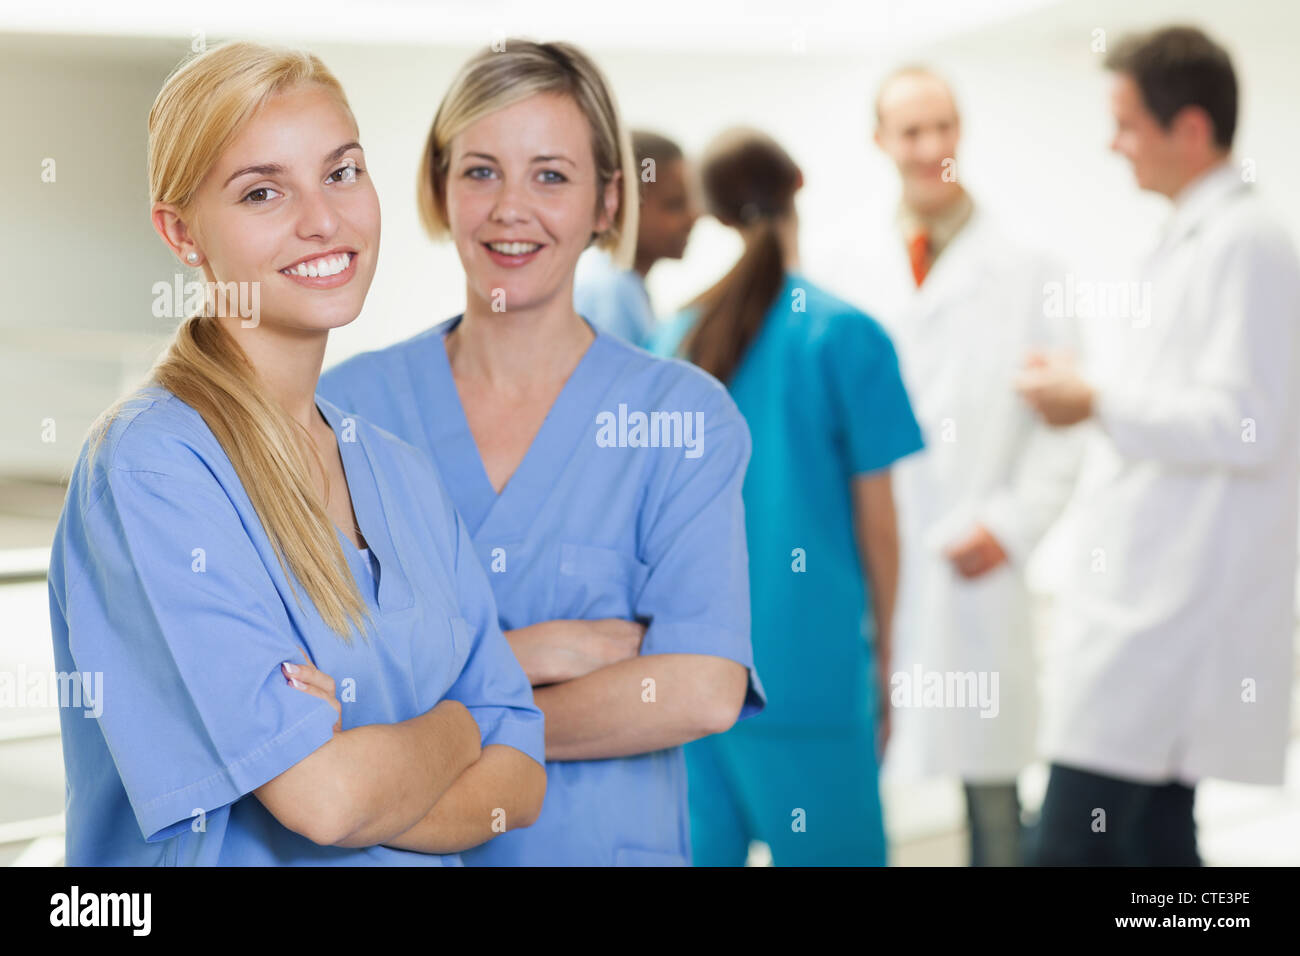 Nurses looking at camera while smiling Banque D'Images